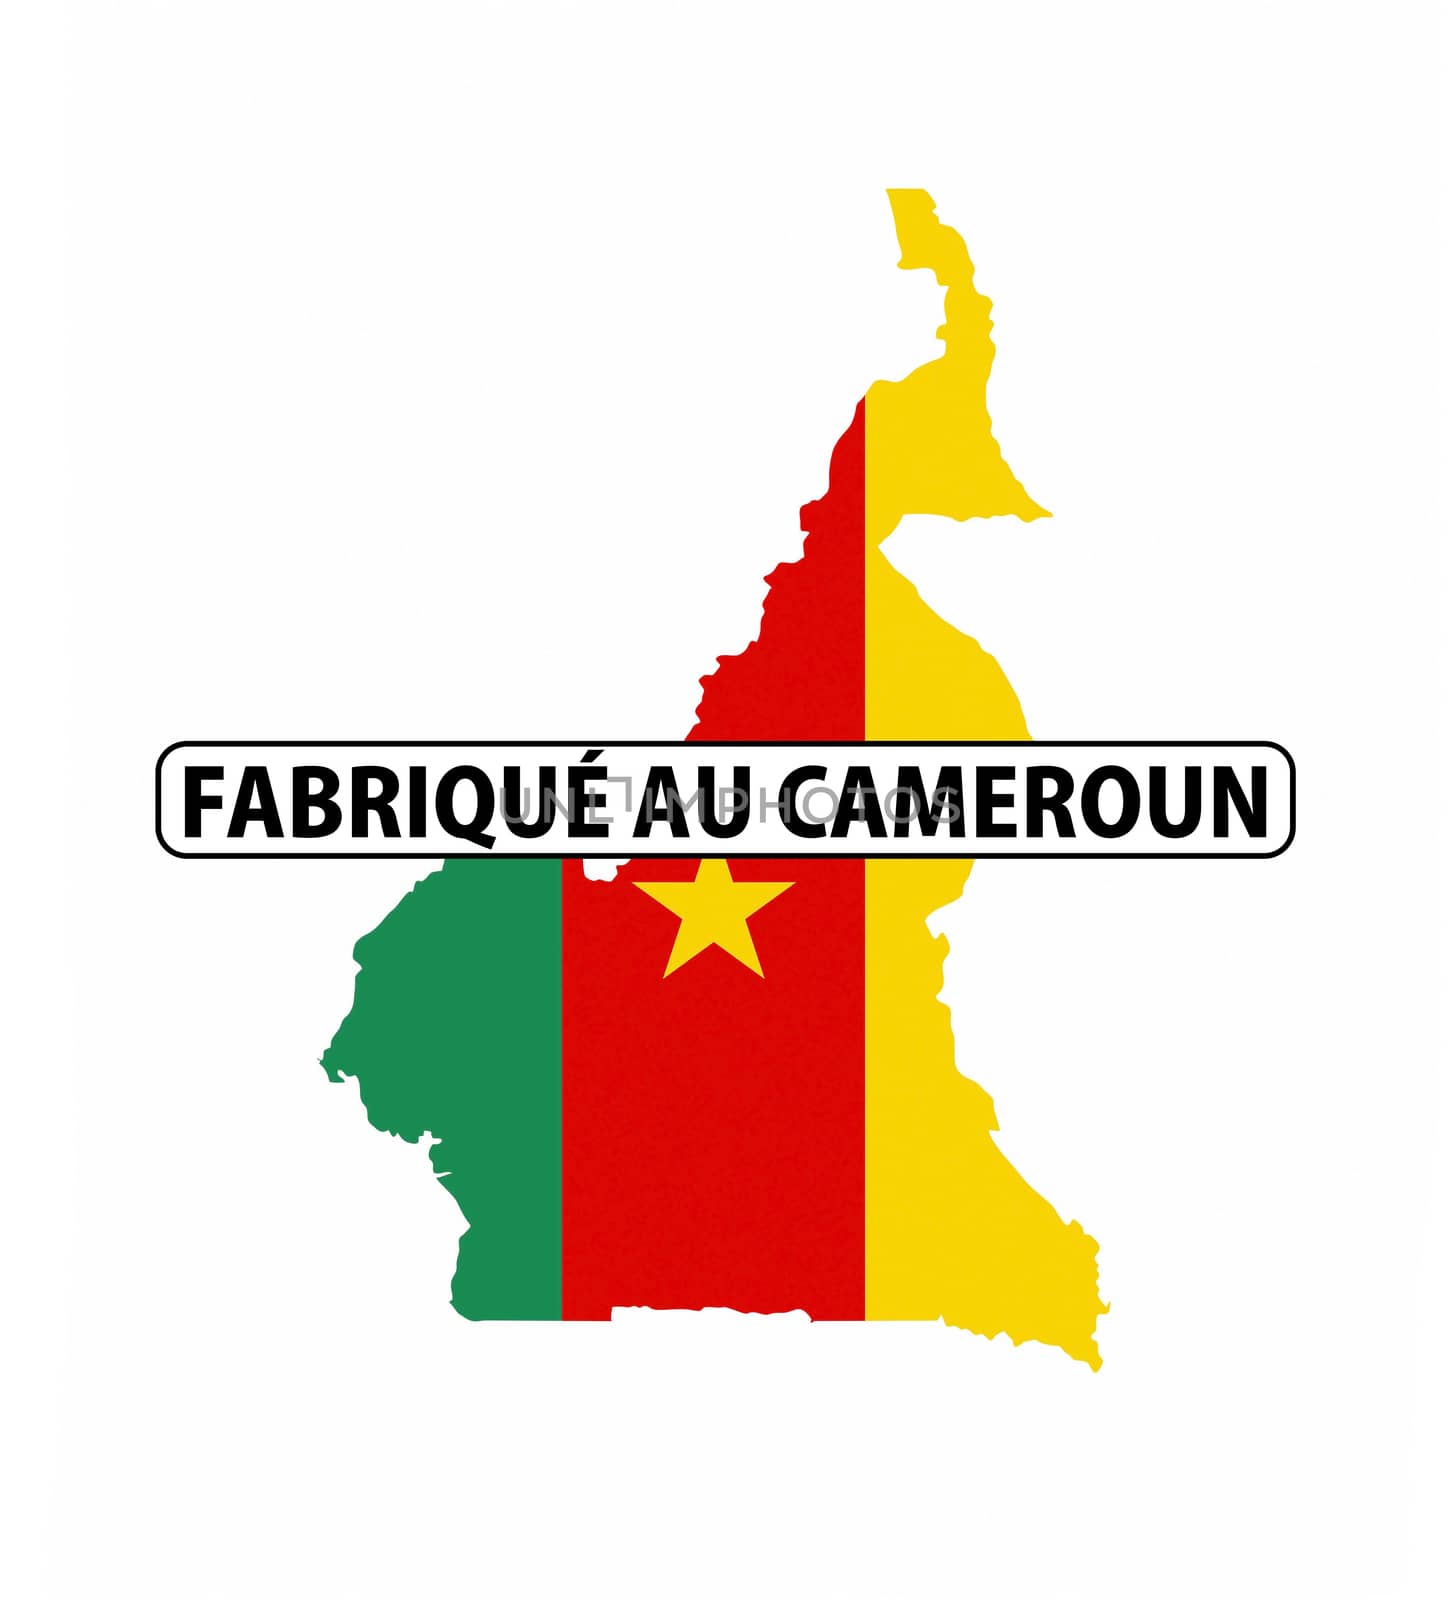 made in cameroon by tony4urban